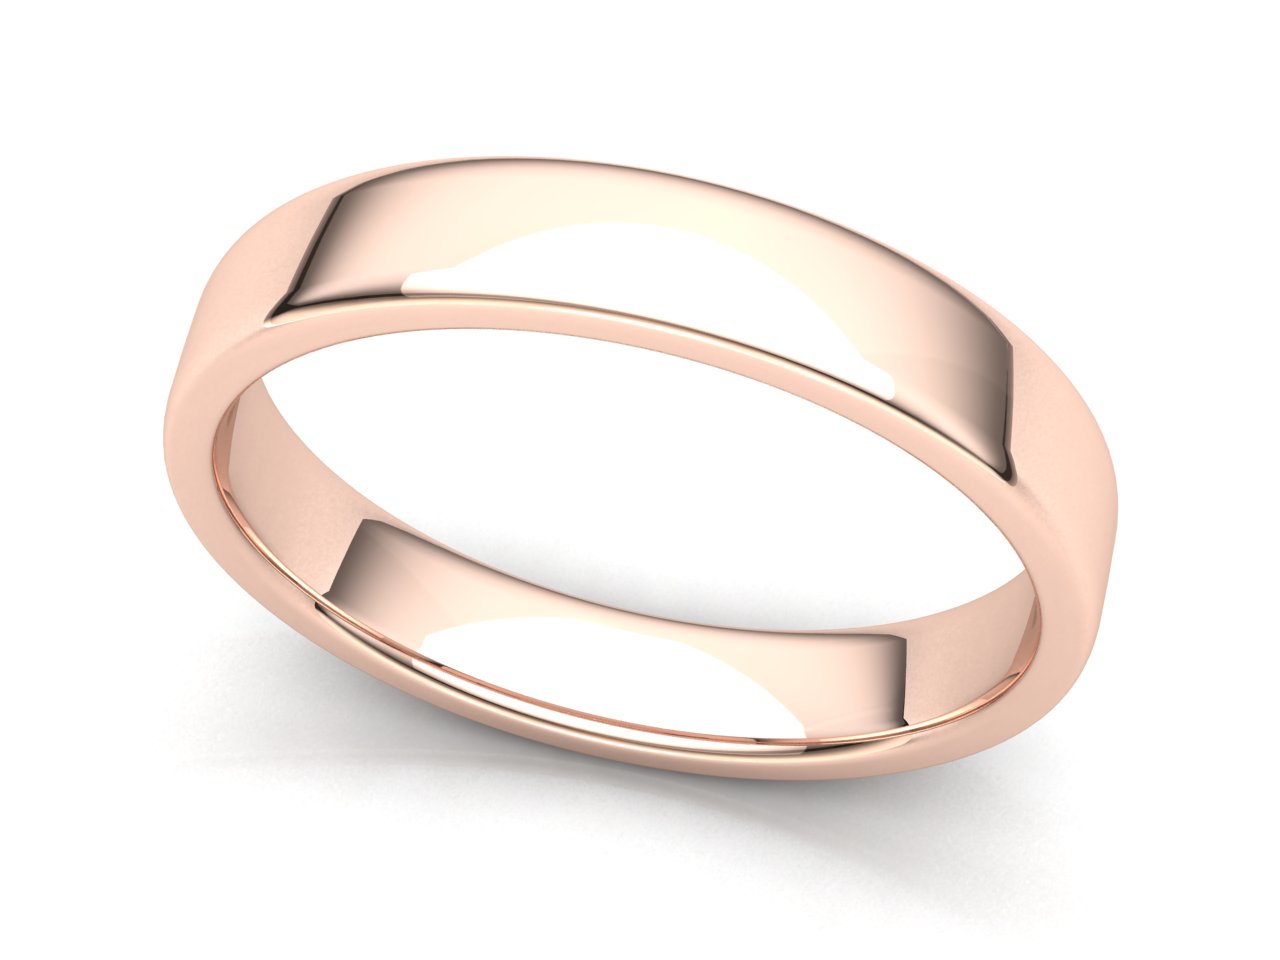 Jewel We Sell Euro Dome Plain Band Ring Men Womens 3mm Solid 14k Rose, White or Yellow Gold